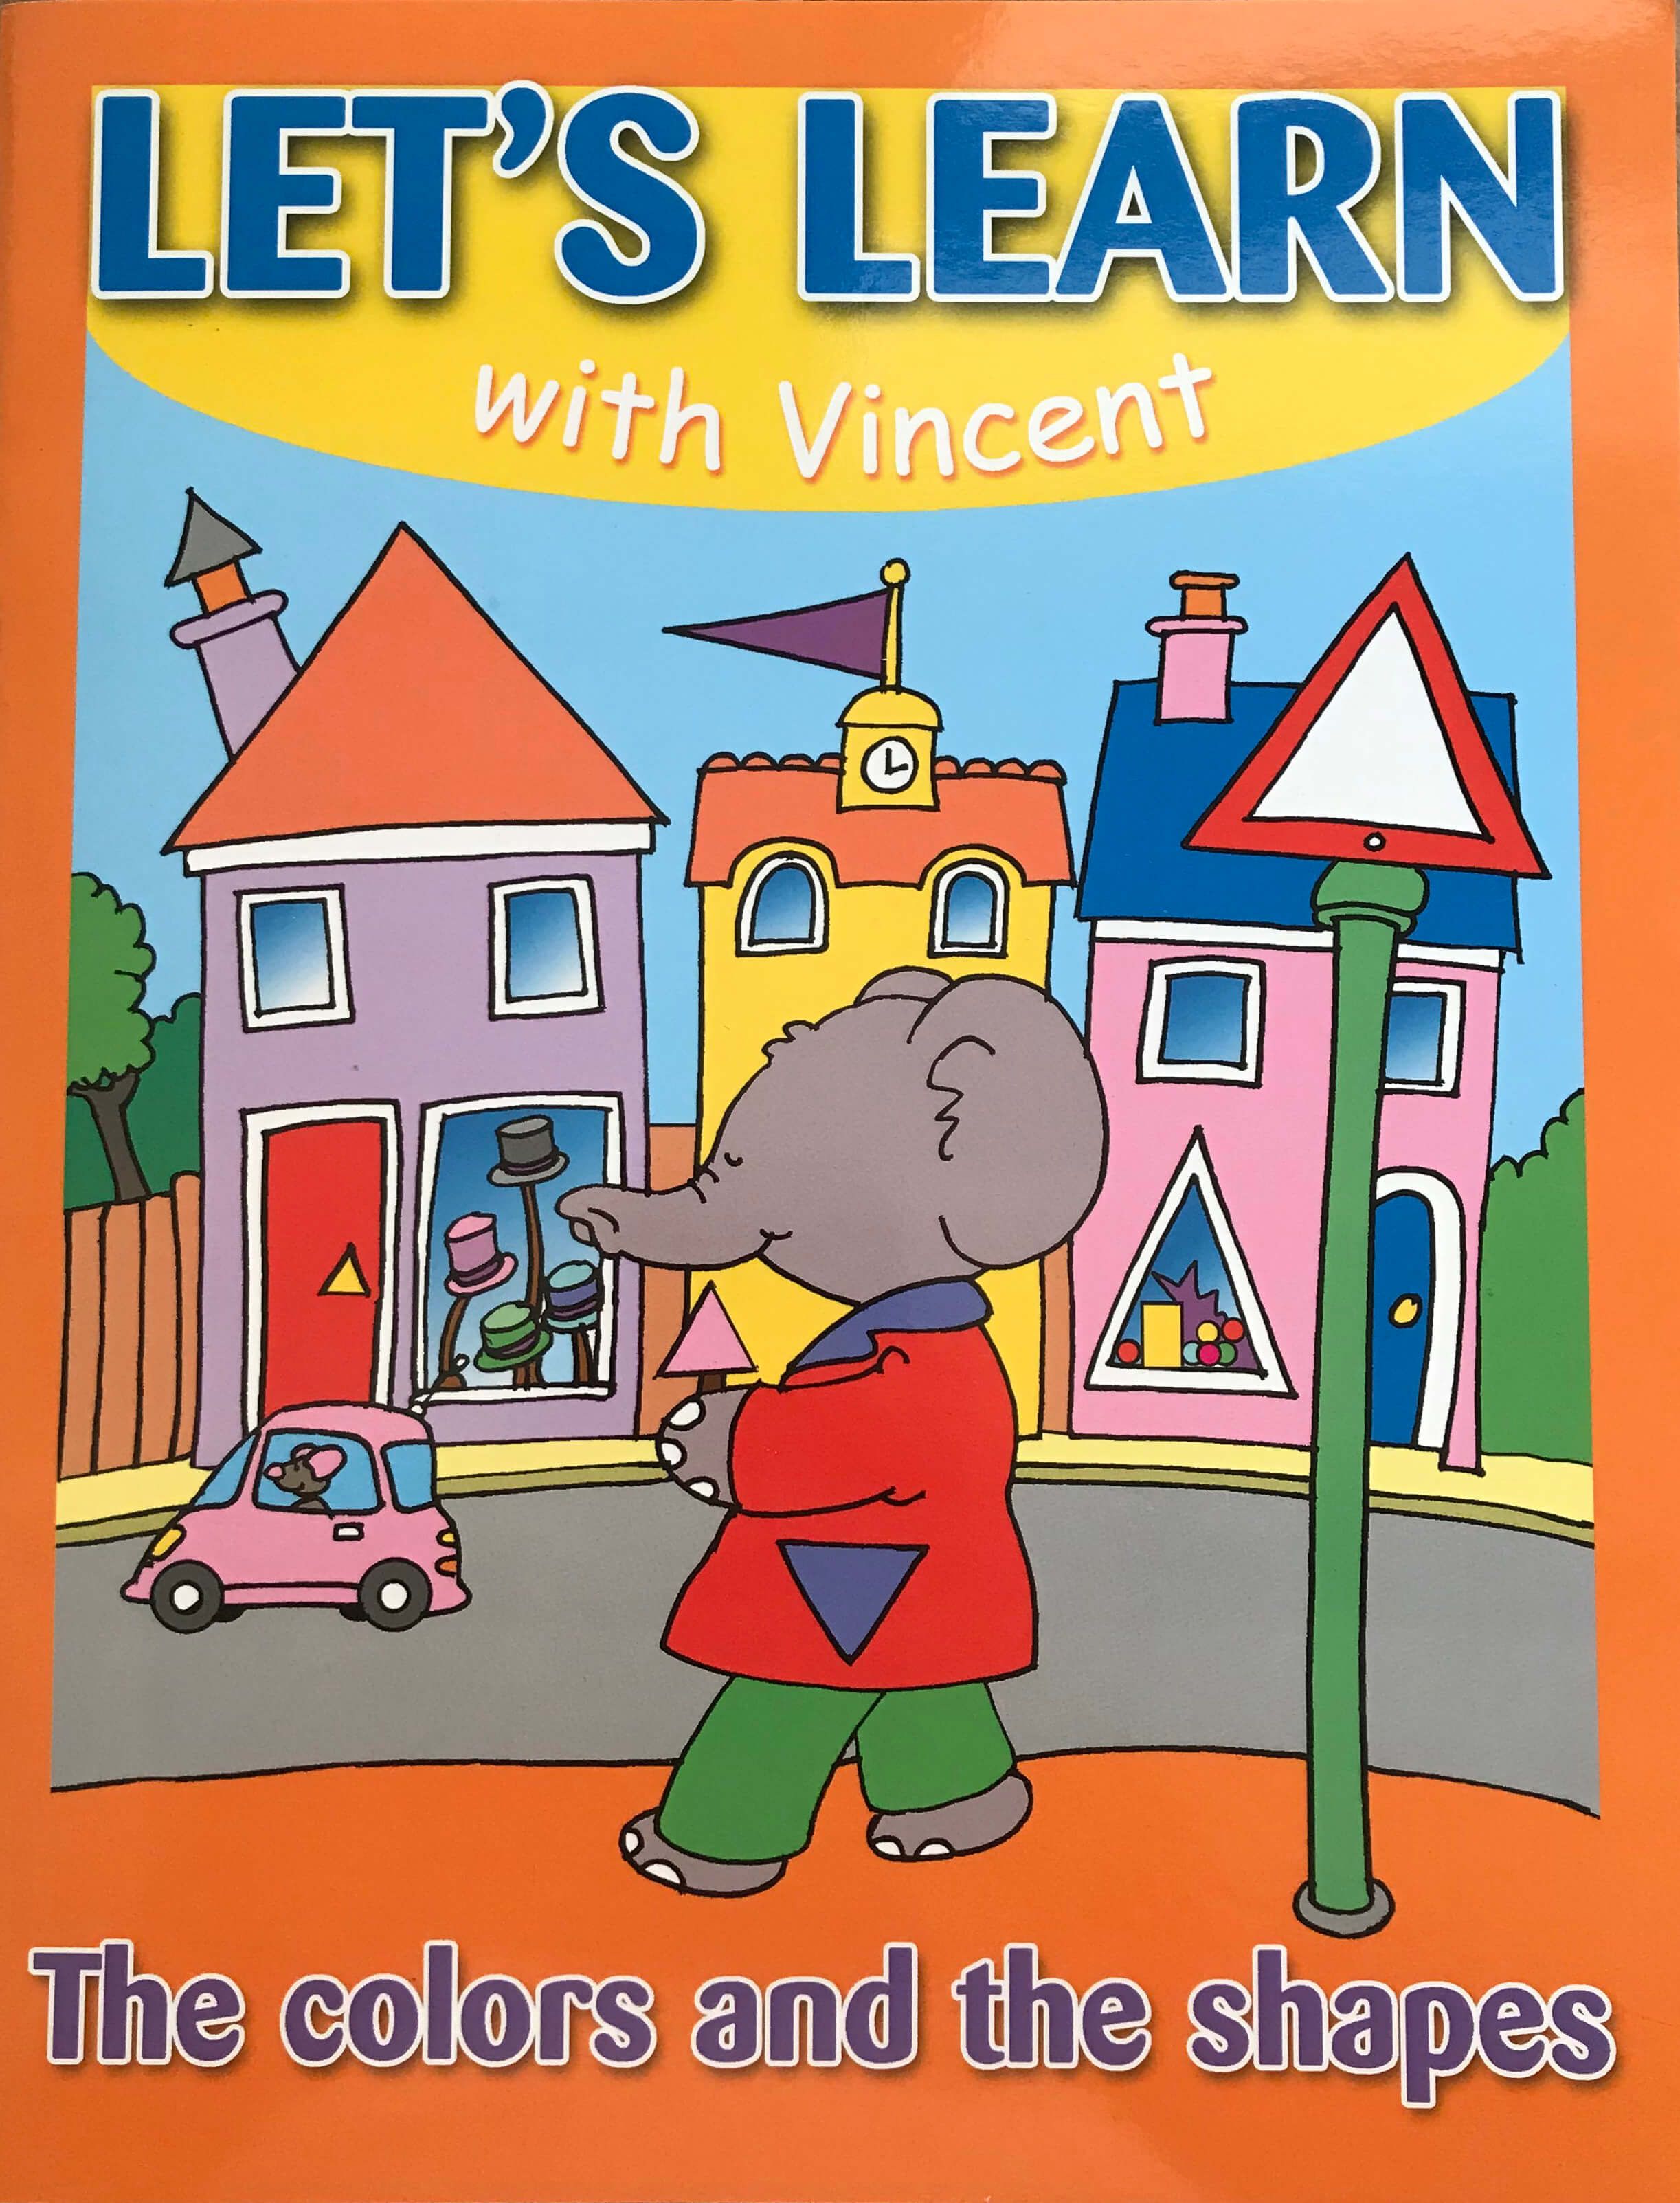 LET'S LEARN with Vincent the colors and the shapes